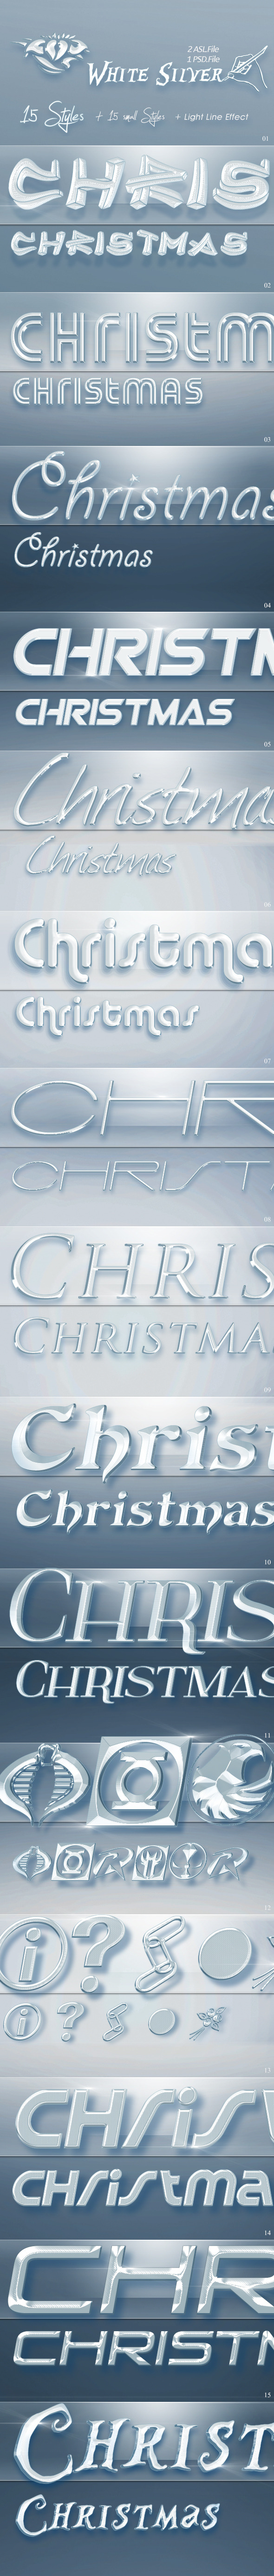 15 White Silver Text Styles for Photoshop (Christm